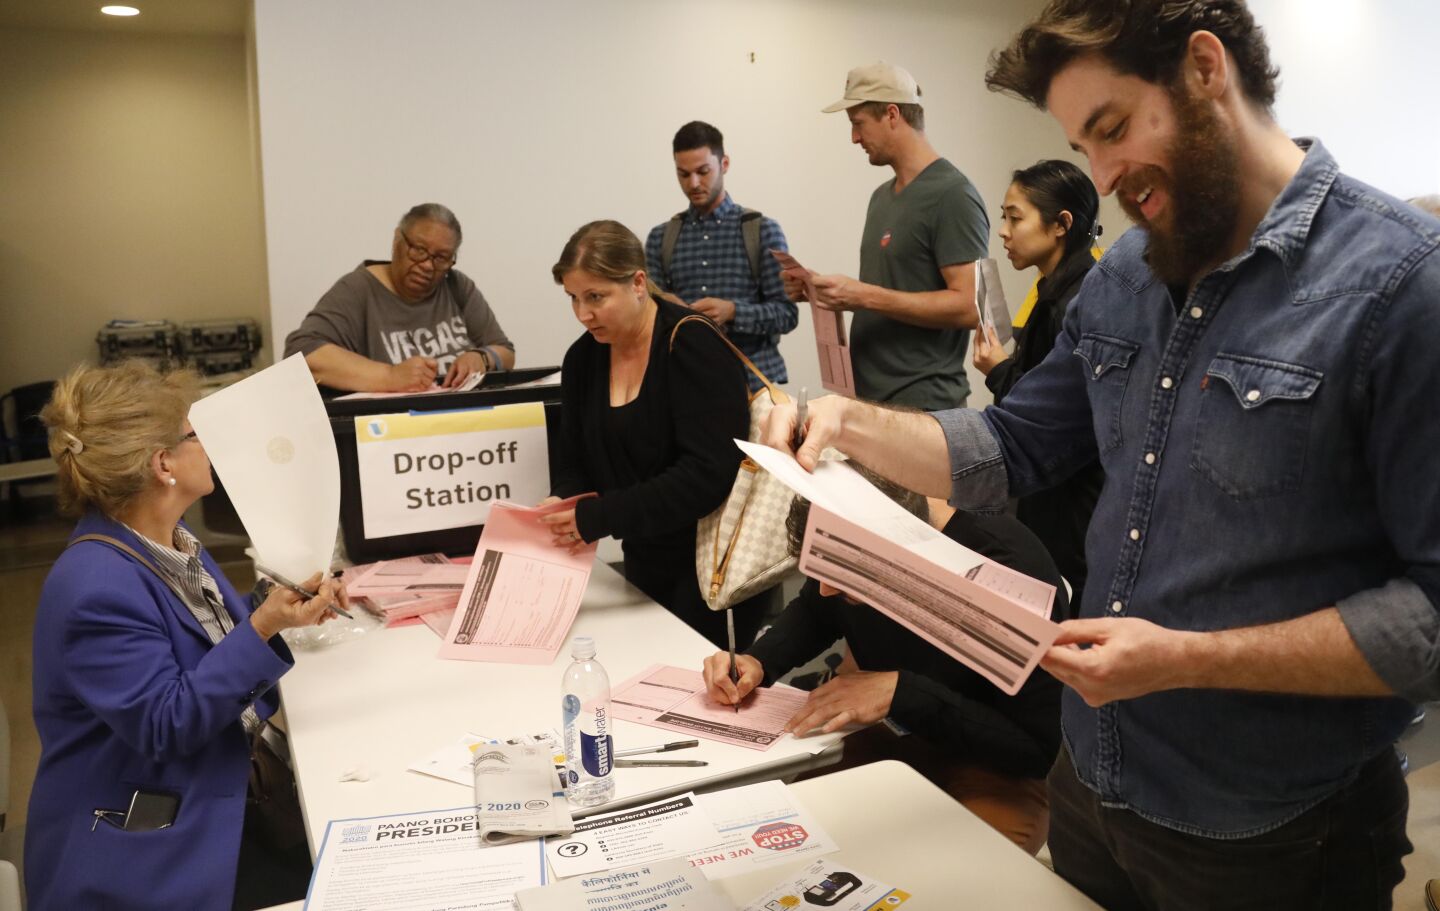 Election official Zahra Katimi, left, answers questions about filling out provisional ballots from voters as Matthew Tetreault, right, looks over his ballot before turning it in at the polling place at Santa Monica Place Mall.